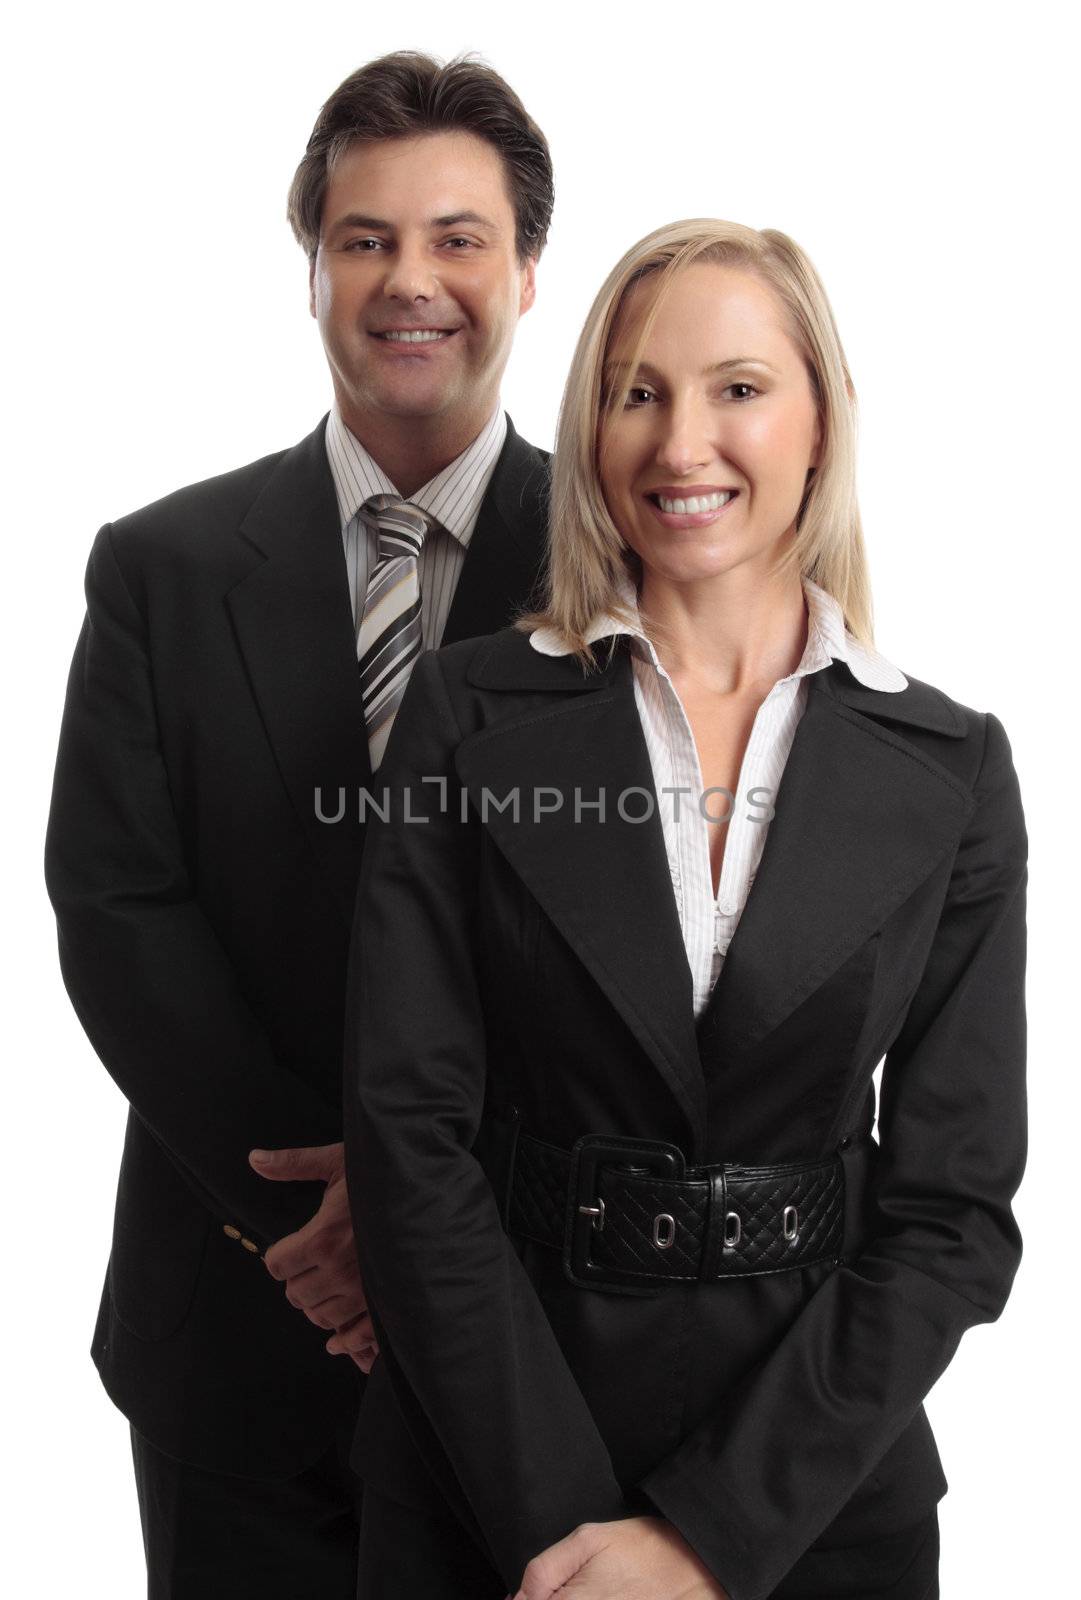 Smiling businessman and businesswoman standing together.